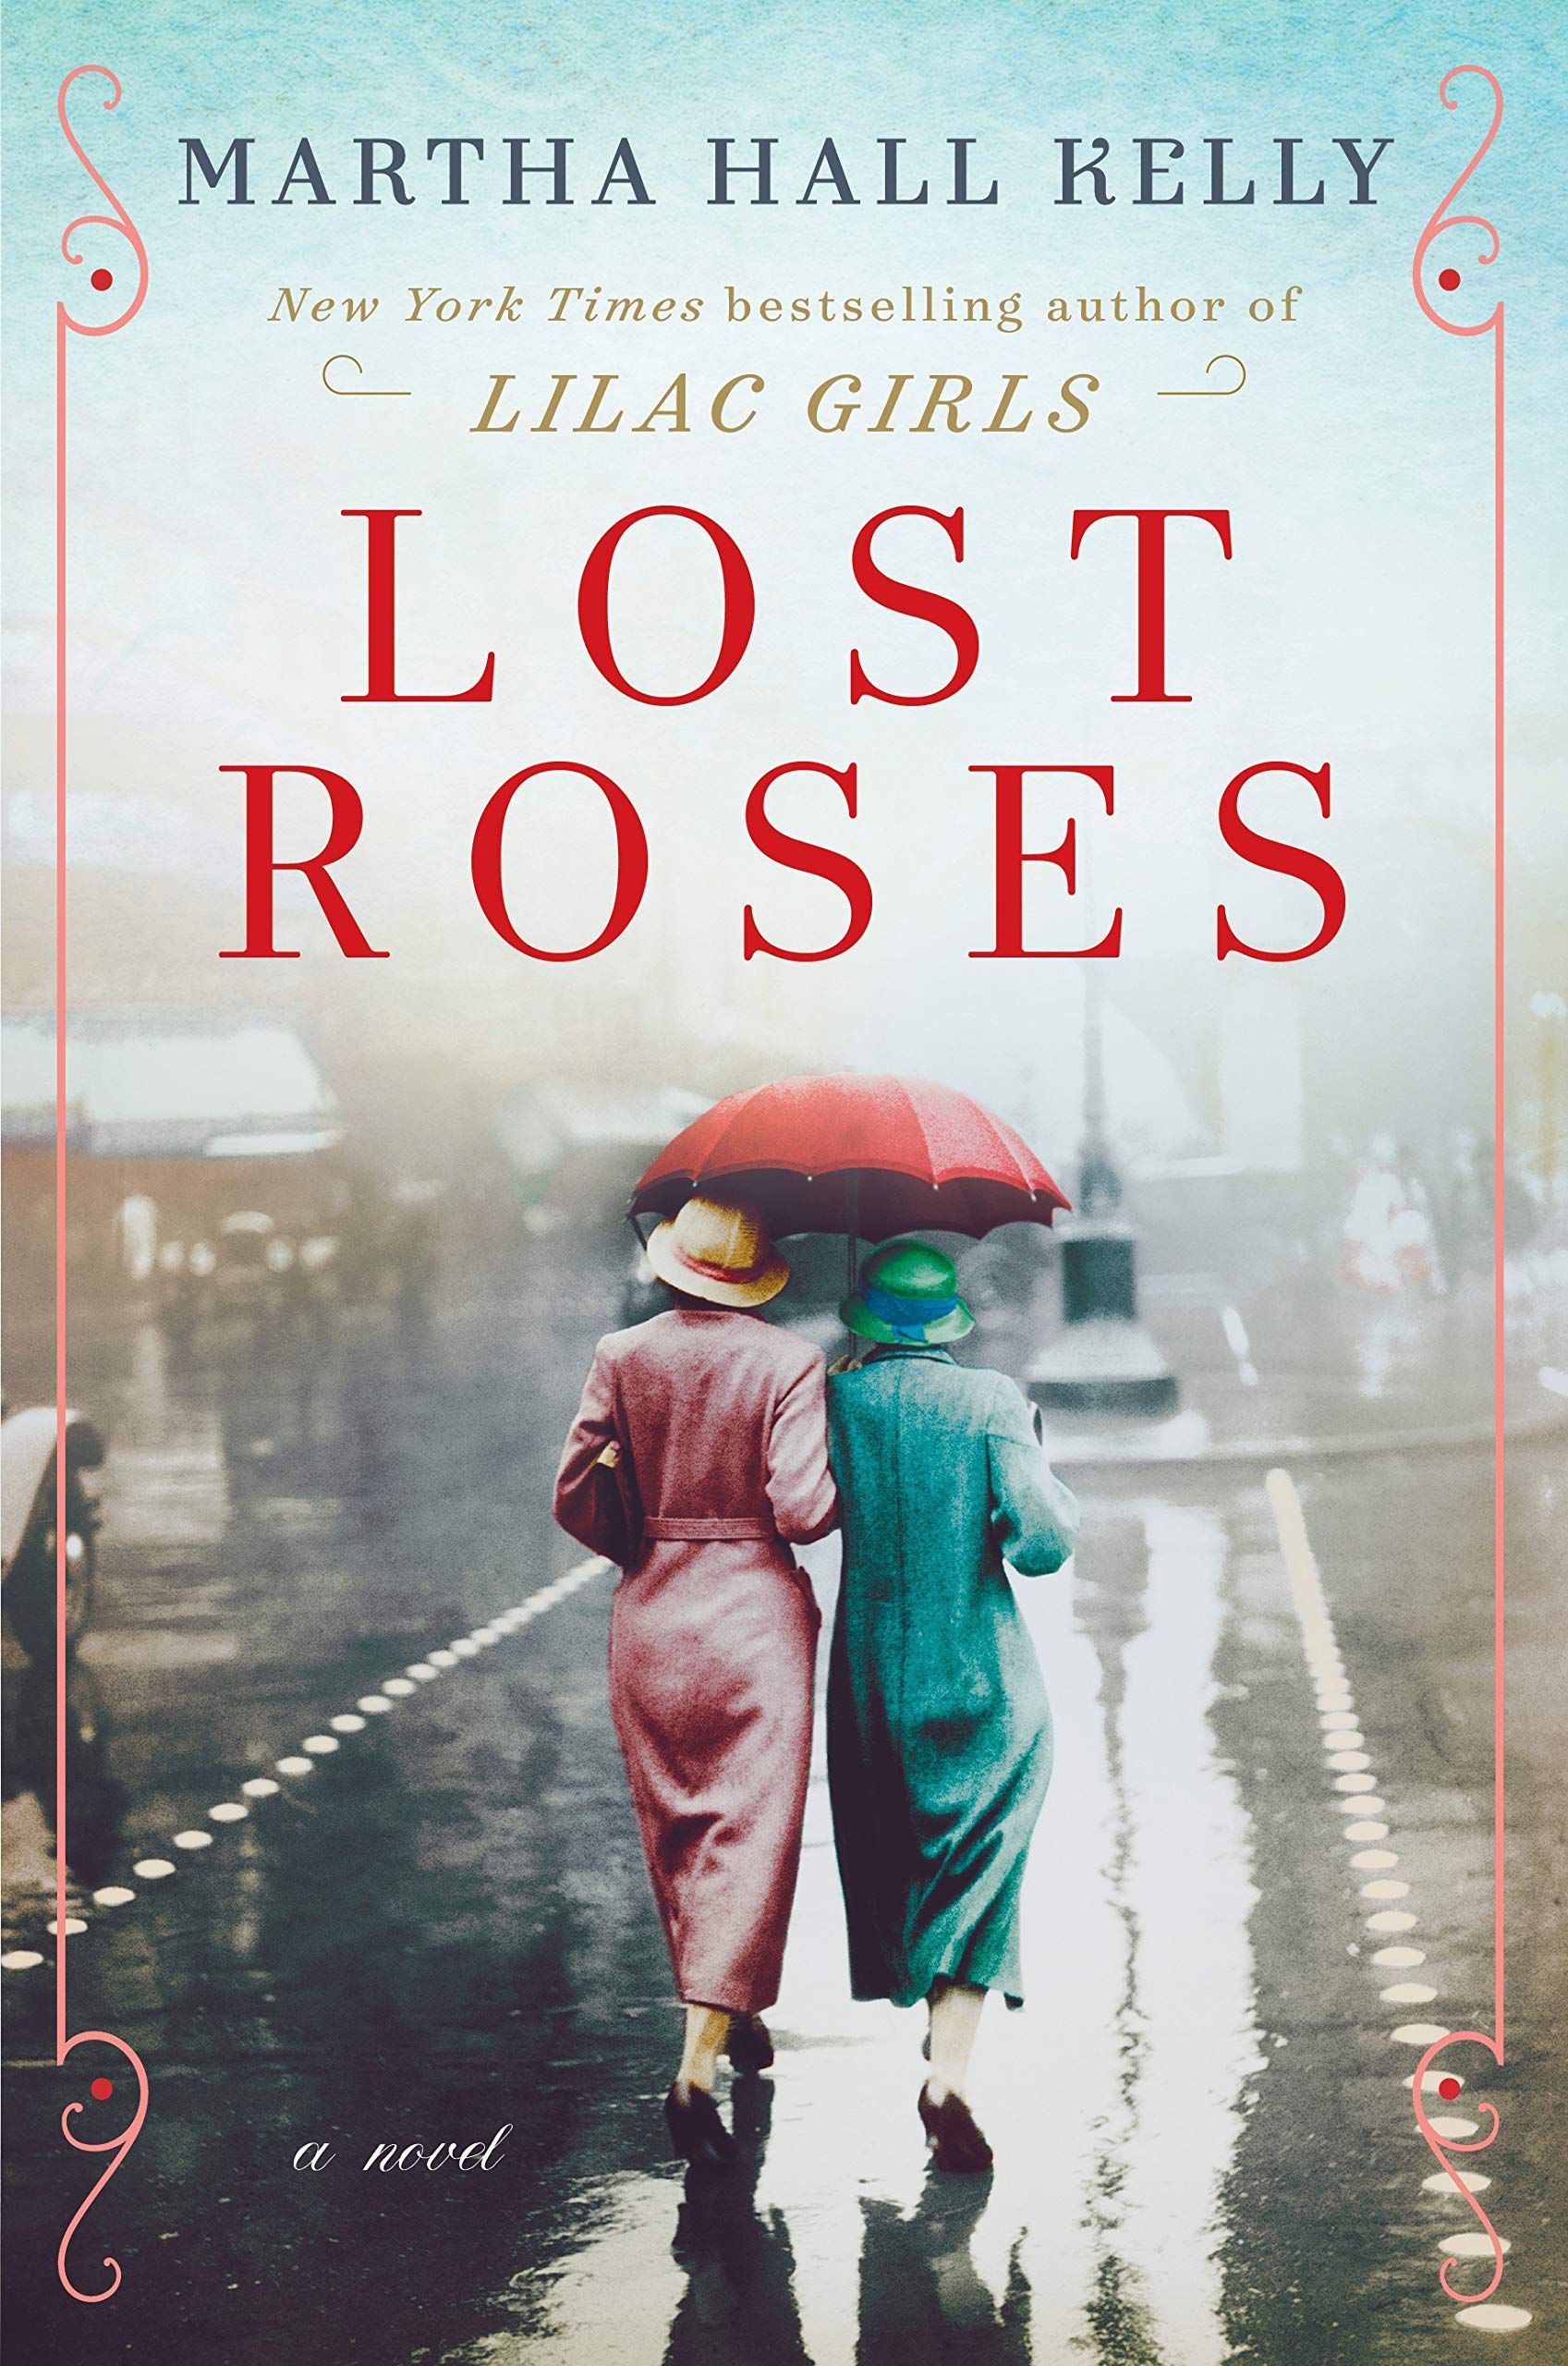 book lost roses